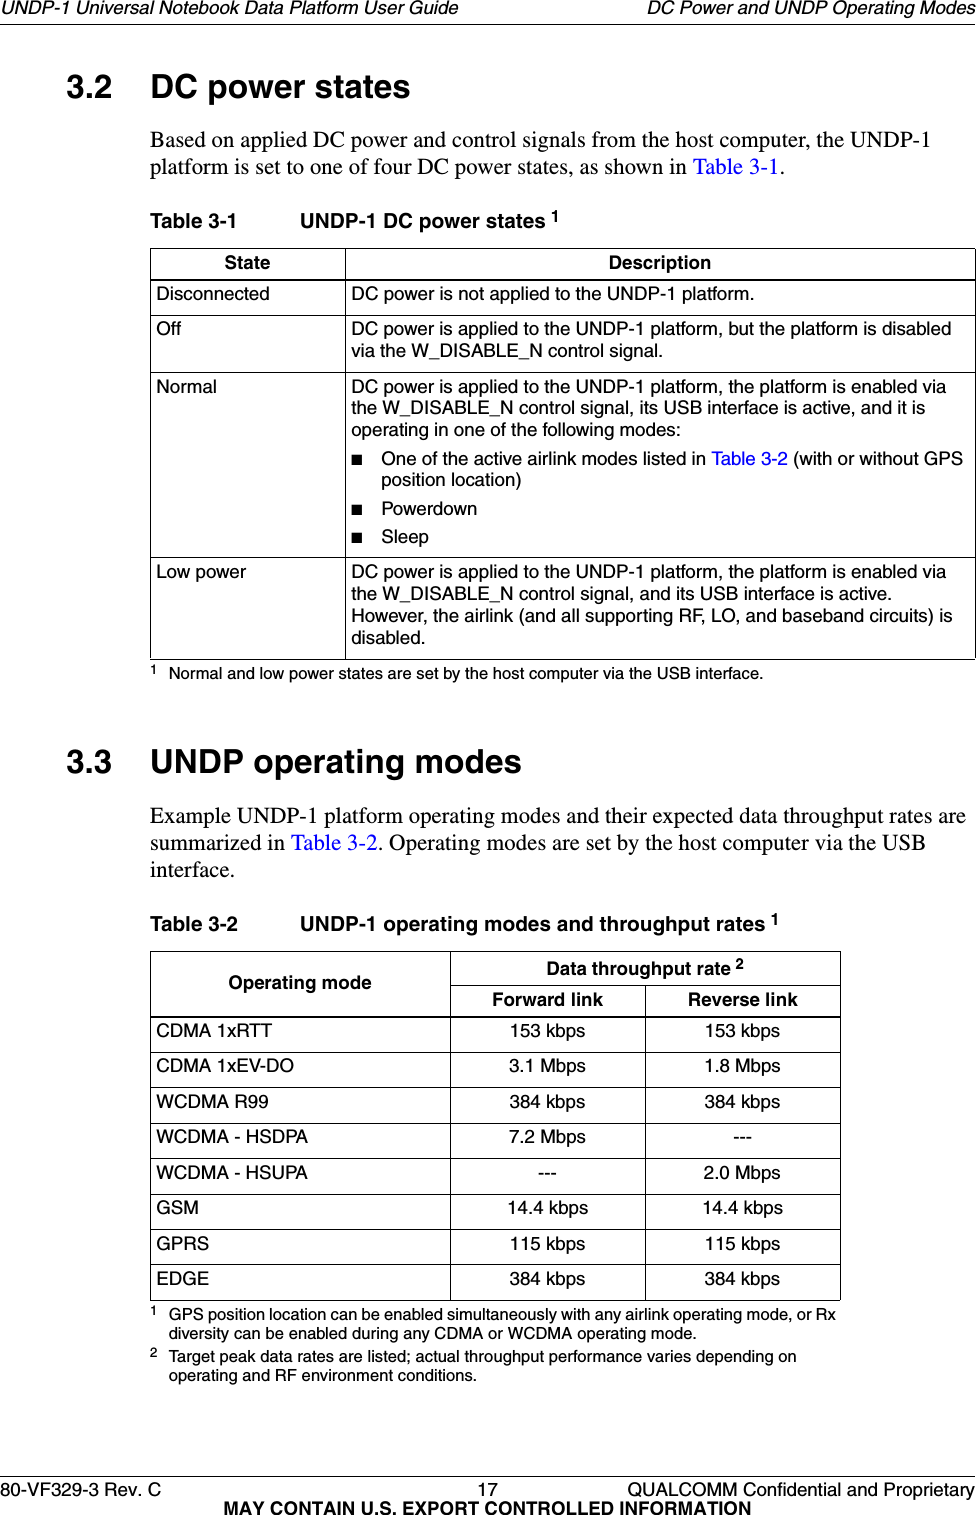 80-VF329-3 Rev. C 17 QUALCOMM Confidential and ProprietaryMAY CONTAIN U.S. EXPORT CONTROLLED INFORMATIONUNDP-1 Universal Notebook Data Platform User Guide DC Power and UNDP Operating Modes3.2 DC power statesBased on applied DC power and control signals from the host computer, the UNDP-1 platform is set to one of four DC power states, as shown in Table 3-1.3.3 UNDP operating modesExample UNDP-1 platform operating modes and their expected data throughput rates are summarized in Table 3-2. Operating modes are set by the host computer via the USB interface.Table 3-1 UNDP-1 DC power states 11Normal and low power states are set by the host computer via the USB interface.State DescriptionDisconnected DC power is not applied to the UNDP-1 platform.Off DC power is applied to the UNDP-1 platform, but the platform is disabled via the W_DISABLE_N control signal.Normal DC power is applied to the UNDP-1 platform, the platform is enabled via the W_DISABLE_N control signal, its USB interface is active, and it is operating in one of the following modes:■One of the active airlink modes listed in Table 3-2 (with or without GPS position location)■Powerdown■SleepLow power DC power is applied to the UNDP-1 platform, the platform is enabled via the W_DISABLE_N control signal, and its USB interface is active. However, the airlink (and all supporting RF, LO, and baseband circuits) is disabled.Table 3-2 UNDP-1 operating modes and throughput rates 11GPS position location can be enabled simultaneously with any airlink operating mode, or Rx diversity can be enabled during any CDMA or WCDMA operating mode.Operating mode Data throughput rate 22Target peak data rates are listed; actual throughput performance varies depending on operating and RF environment conditions.Forward link Reverse linkCDMA 1xRTT 153 kbps 153 kbpsCDMA 1xEV-DO 3.1 Mbps 1.8 MbpsWCDMA R99 384 kbps 384 kbpsWCDMA - HSDPA 7.2 Mbps ---WCDMA - HSUPA --- 2.0 MbpsGSM 14.4 kbps 14.4 kbpsGPRS 115 kbps 115 kbpsEDGE 384 kbps 384 kbps